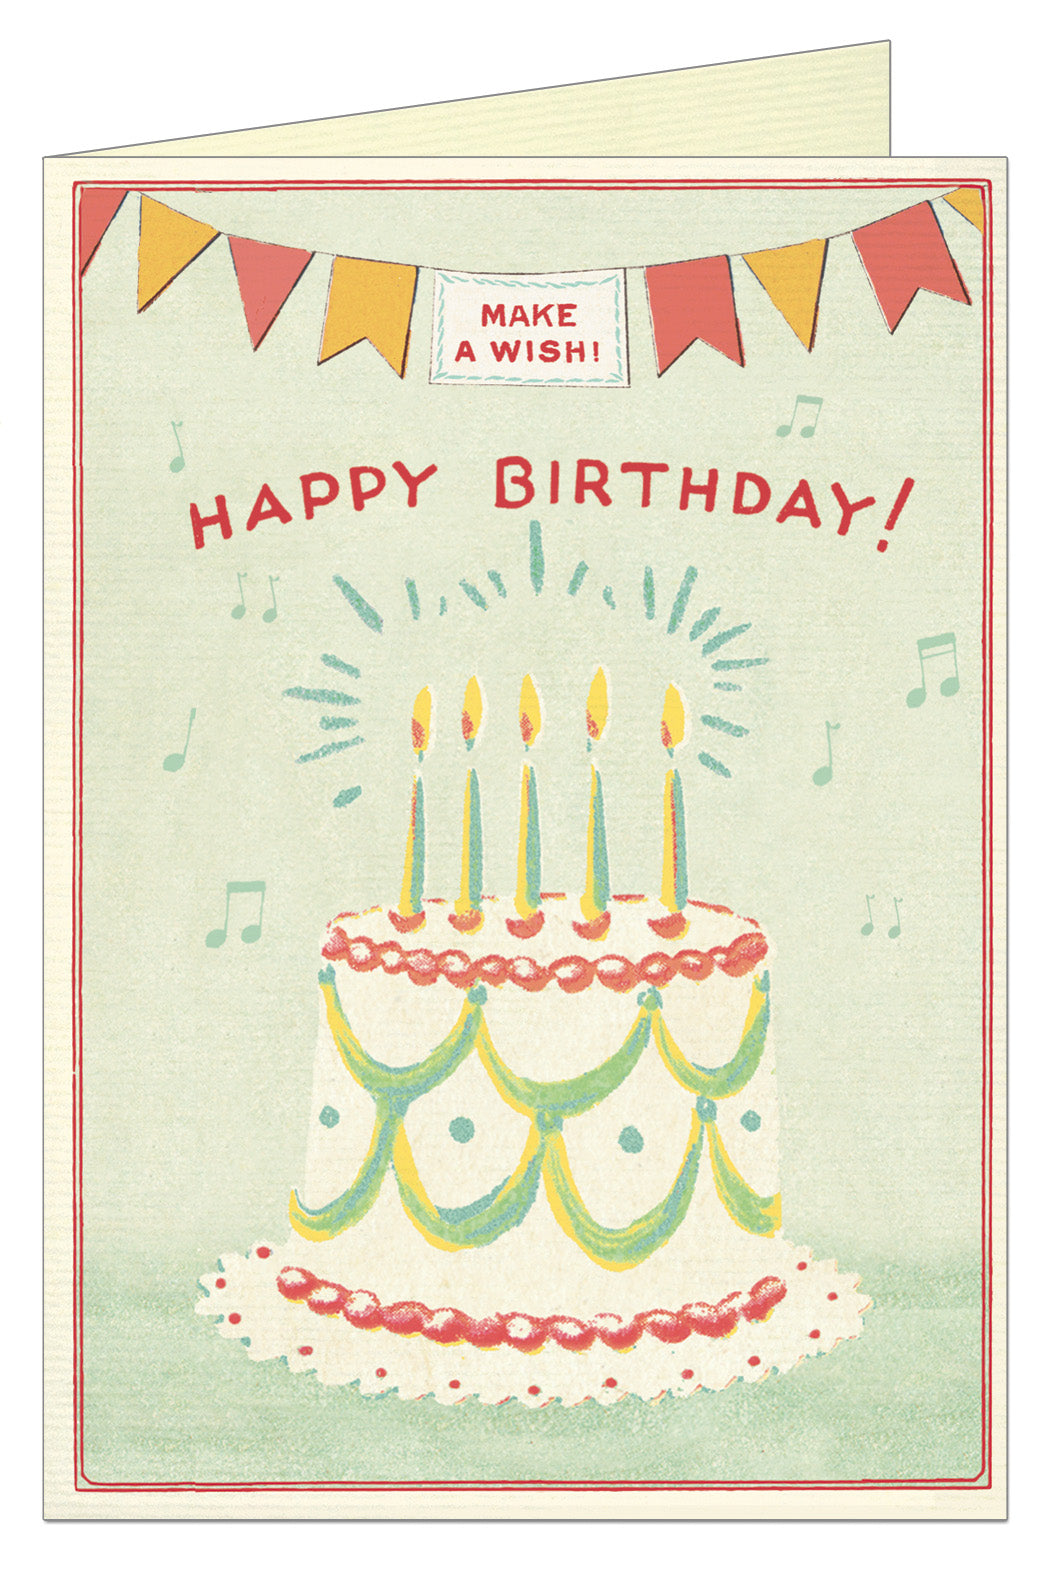 Group Birthday Cards - birthday wishes from all of us cake - birthday  office group card